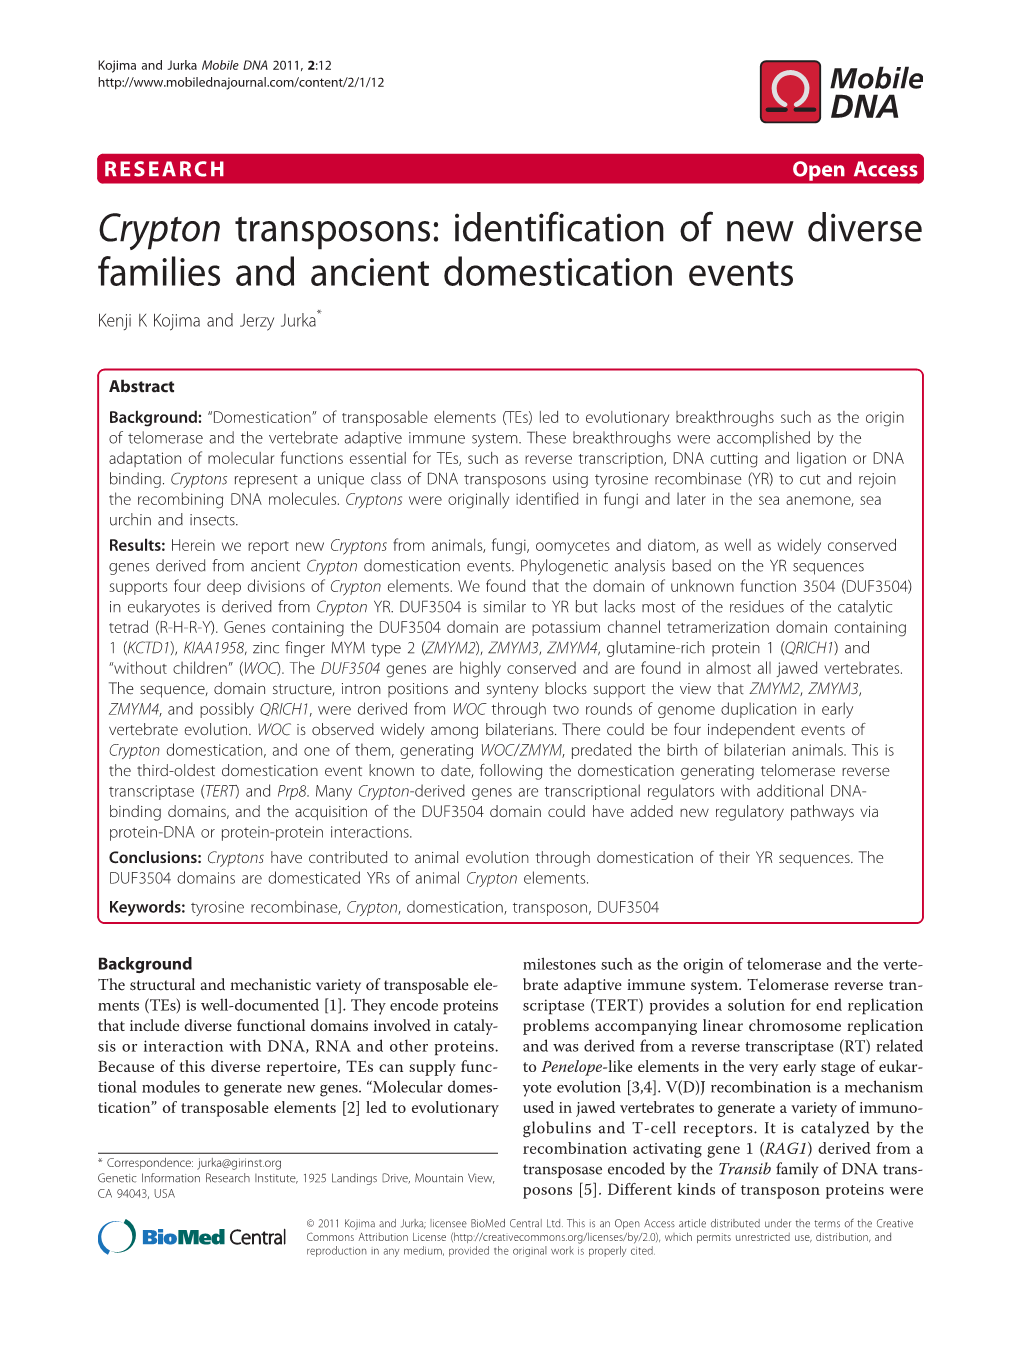 Crypton Transposons: Identification of New Diverse Families and Ancient Domestication Events Kenji K Kojima and Jerzy Jurka*